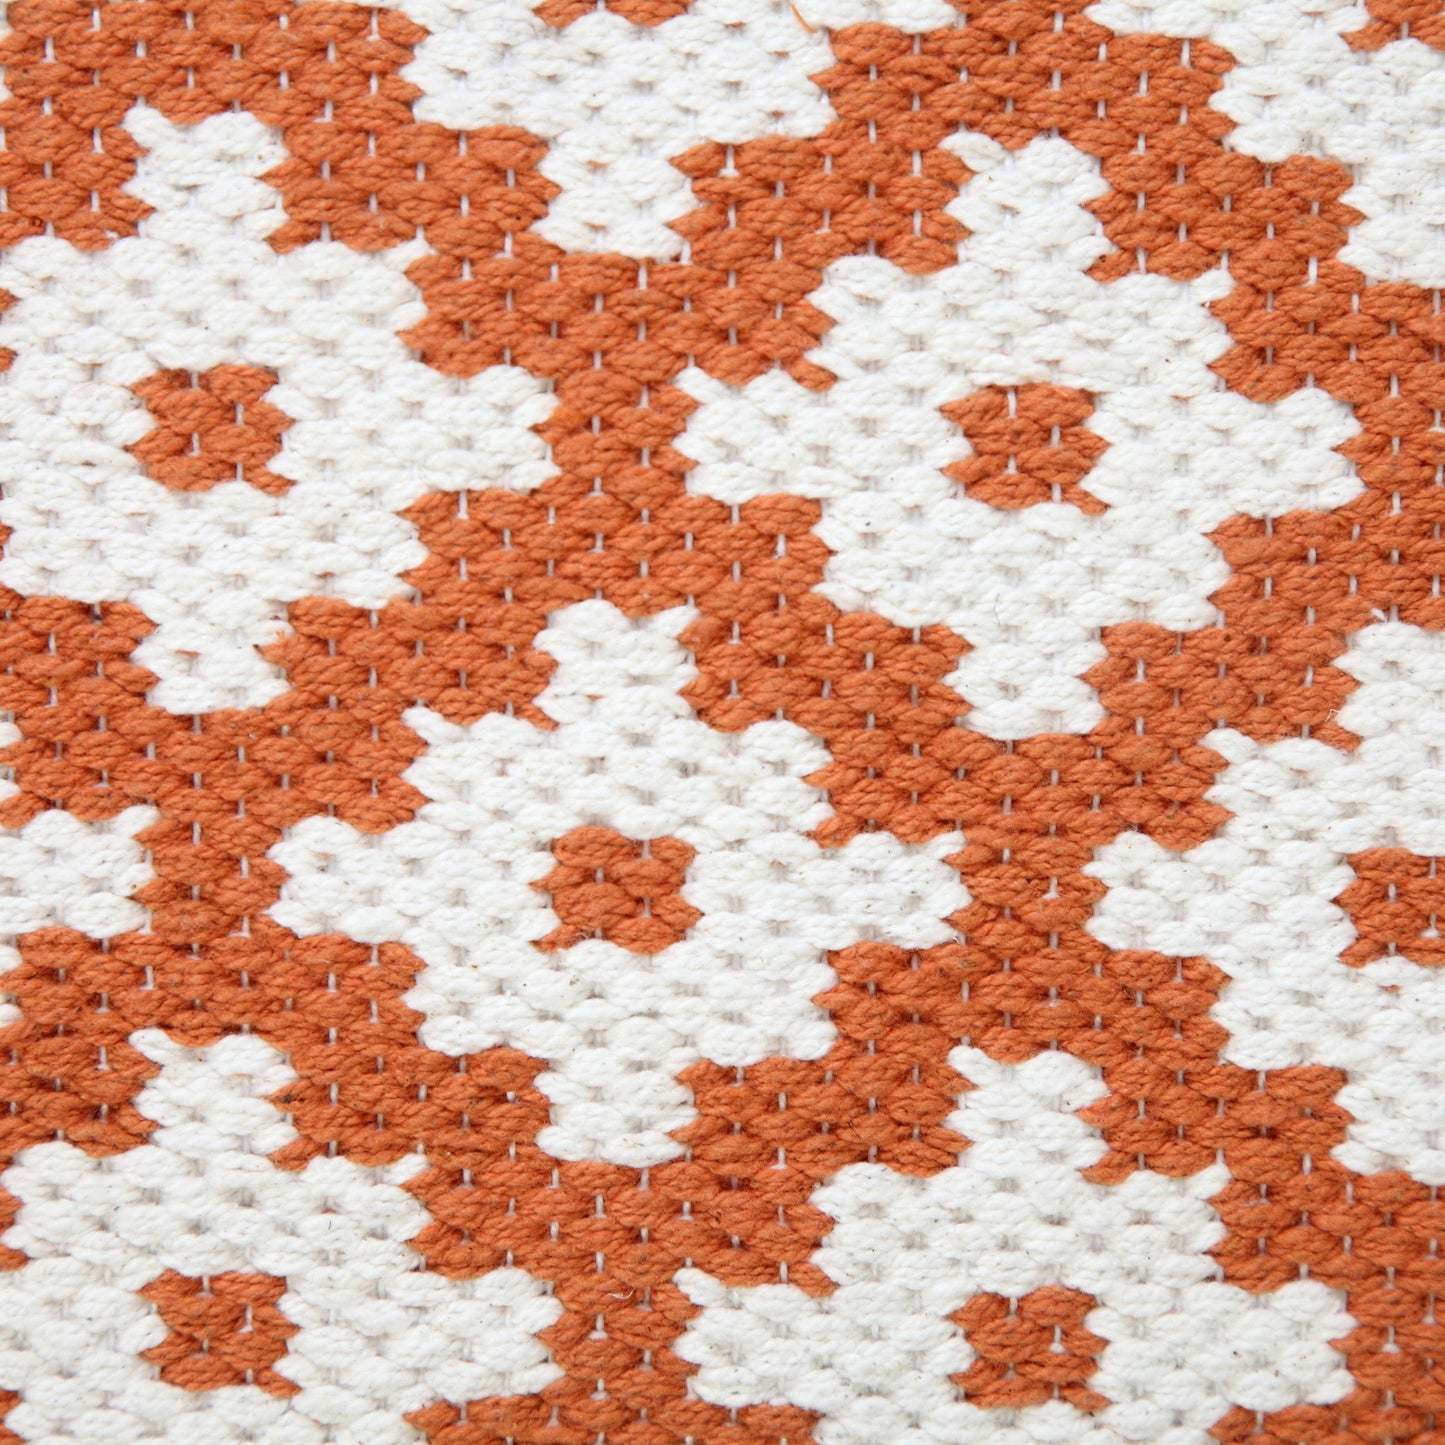 A close up of the geo-floral pattern in white and orange